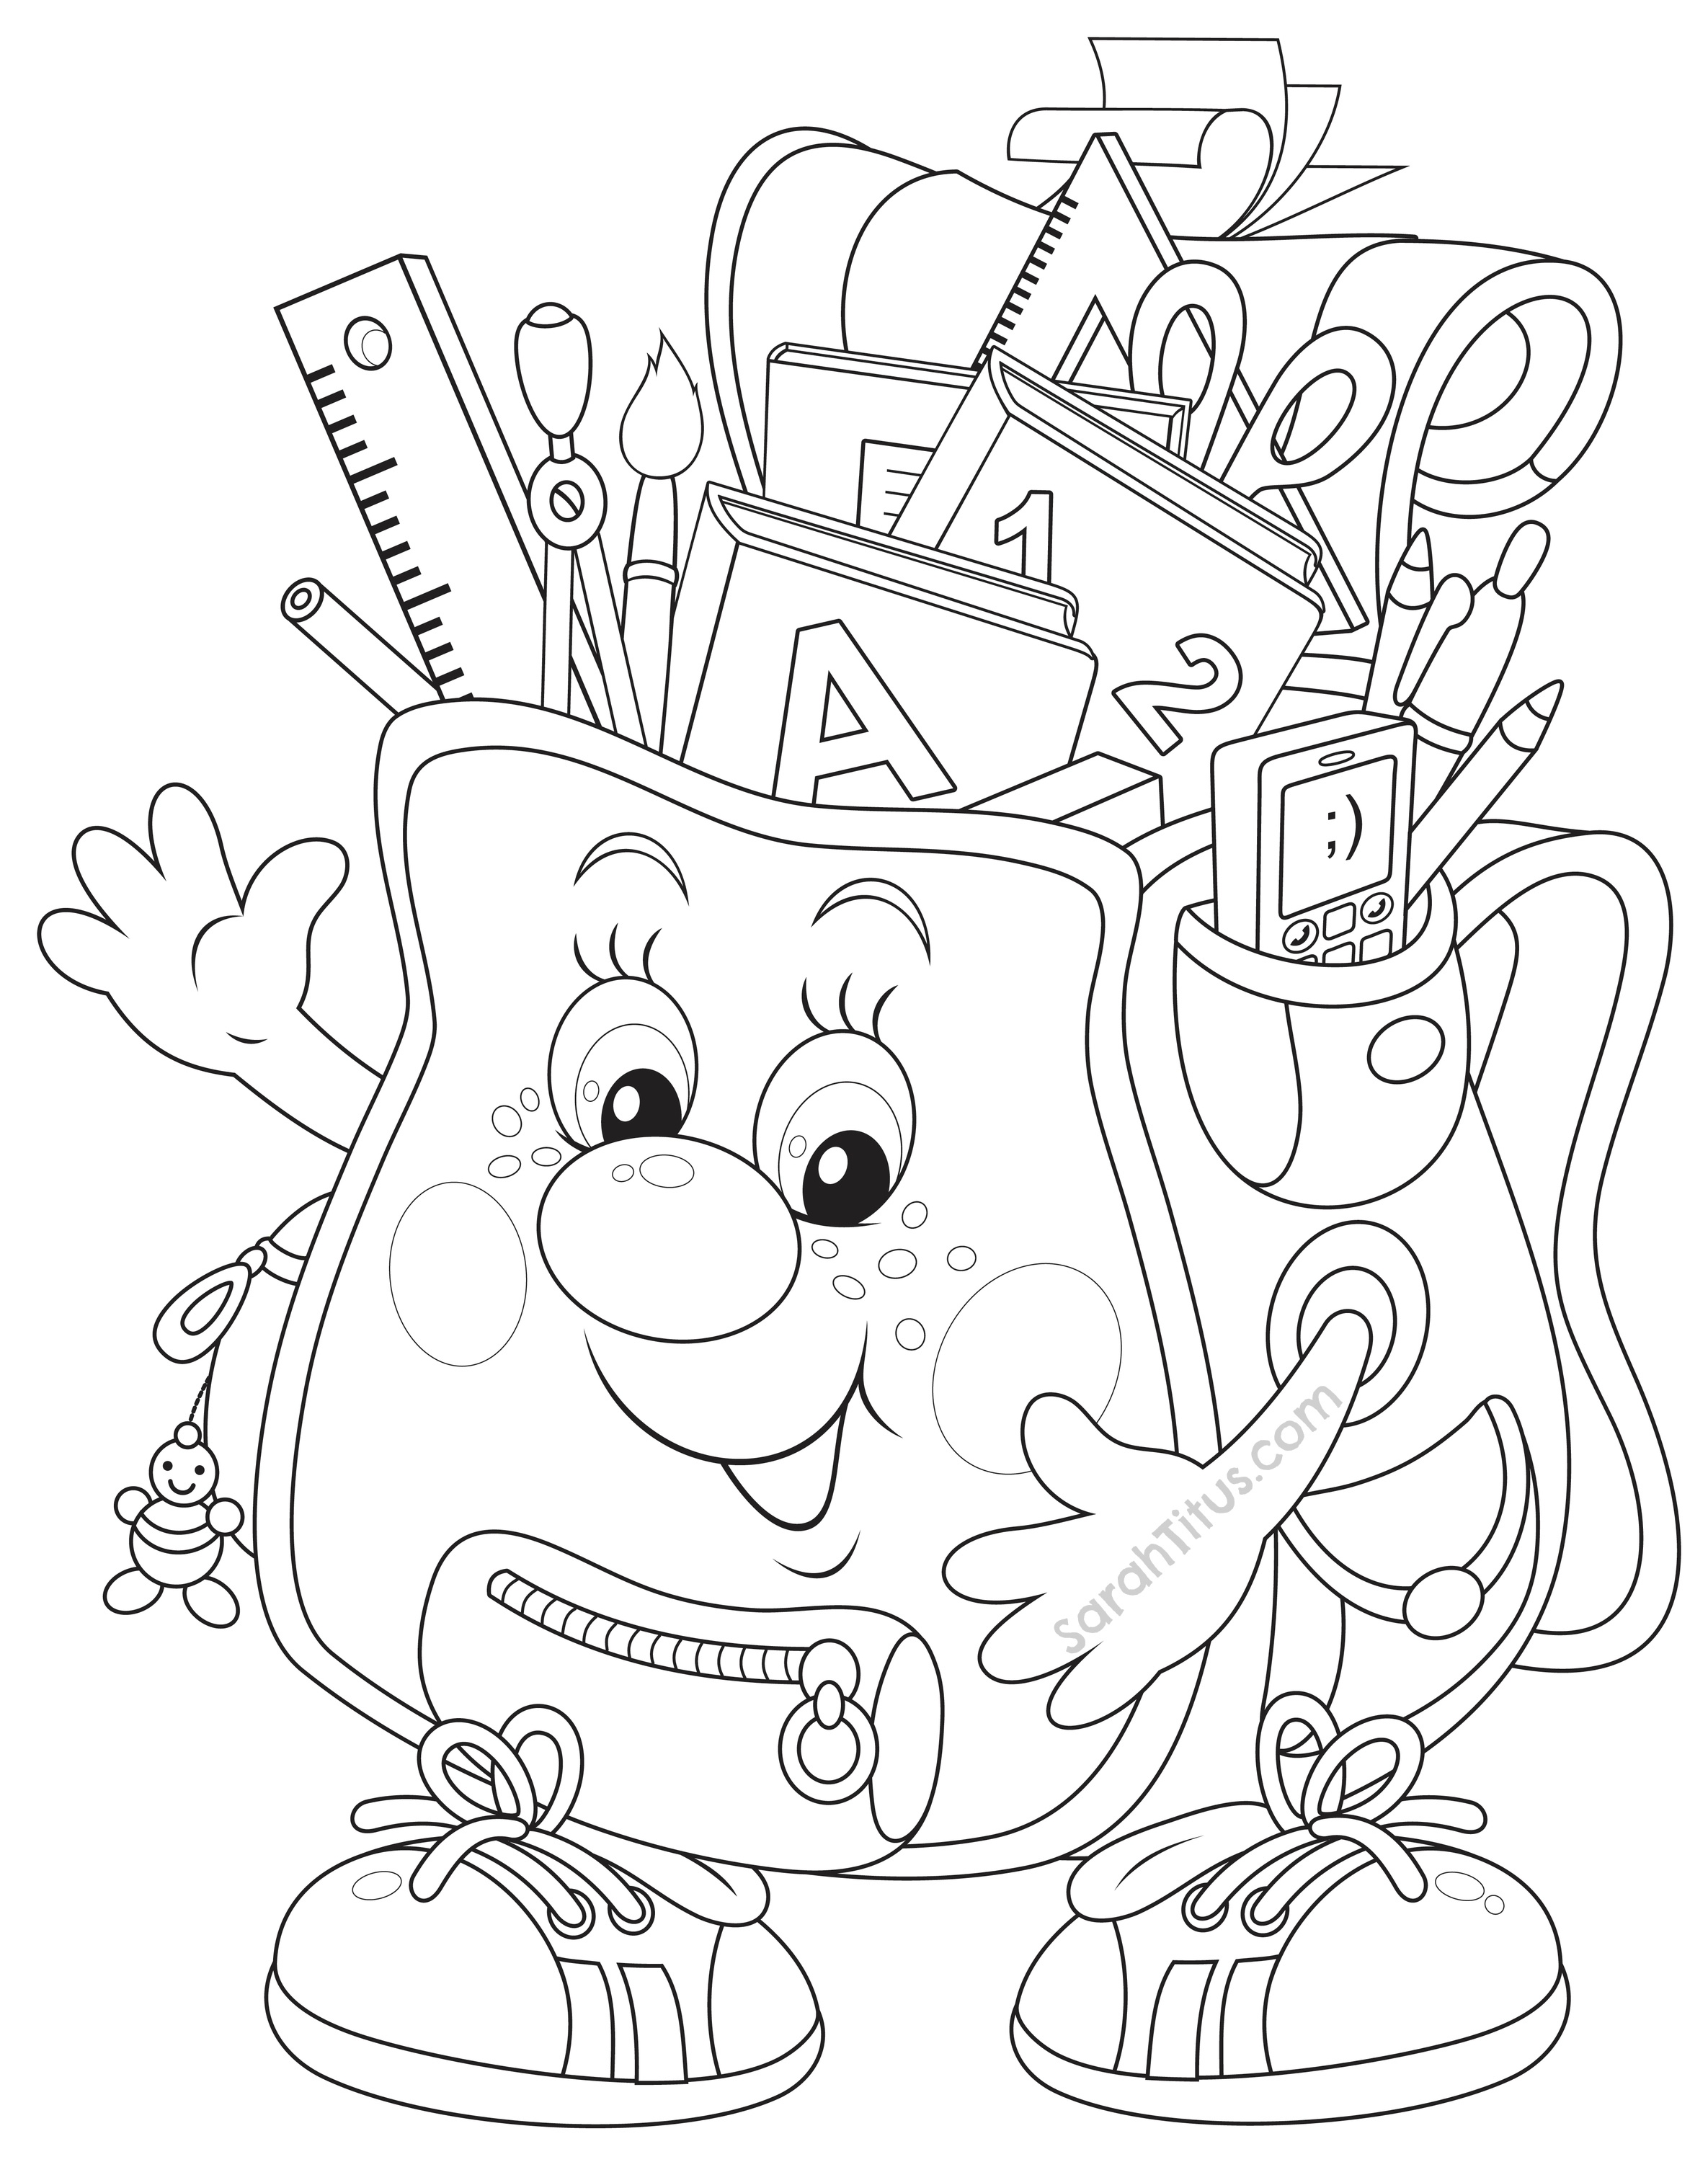 end-of-year-coloring-pages-at-getcolorings-free-printable-colorings-pages-to-print-and-color